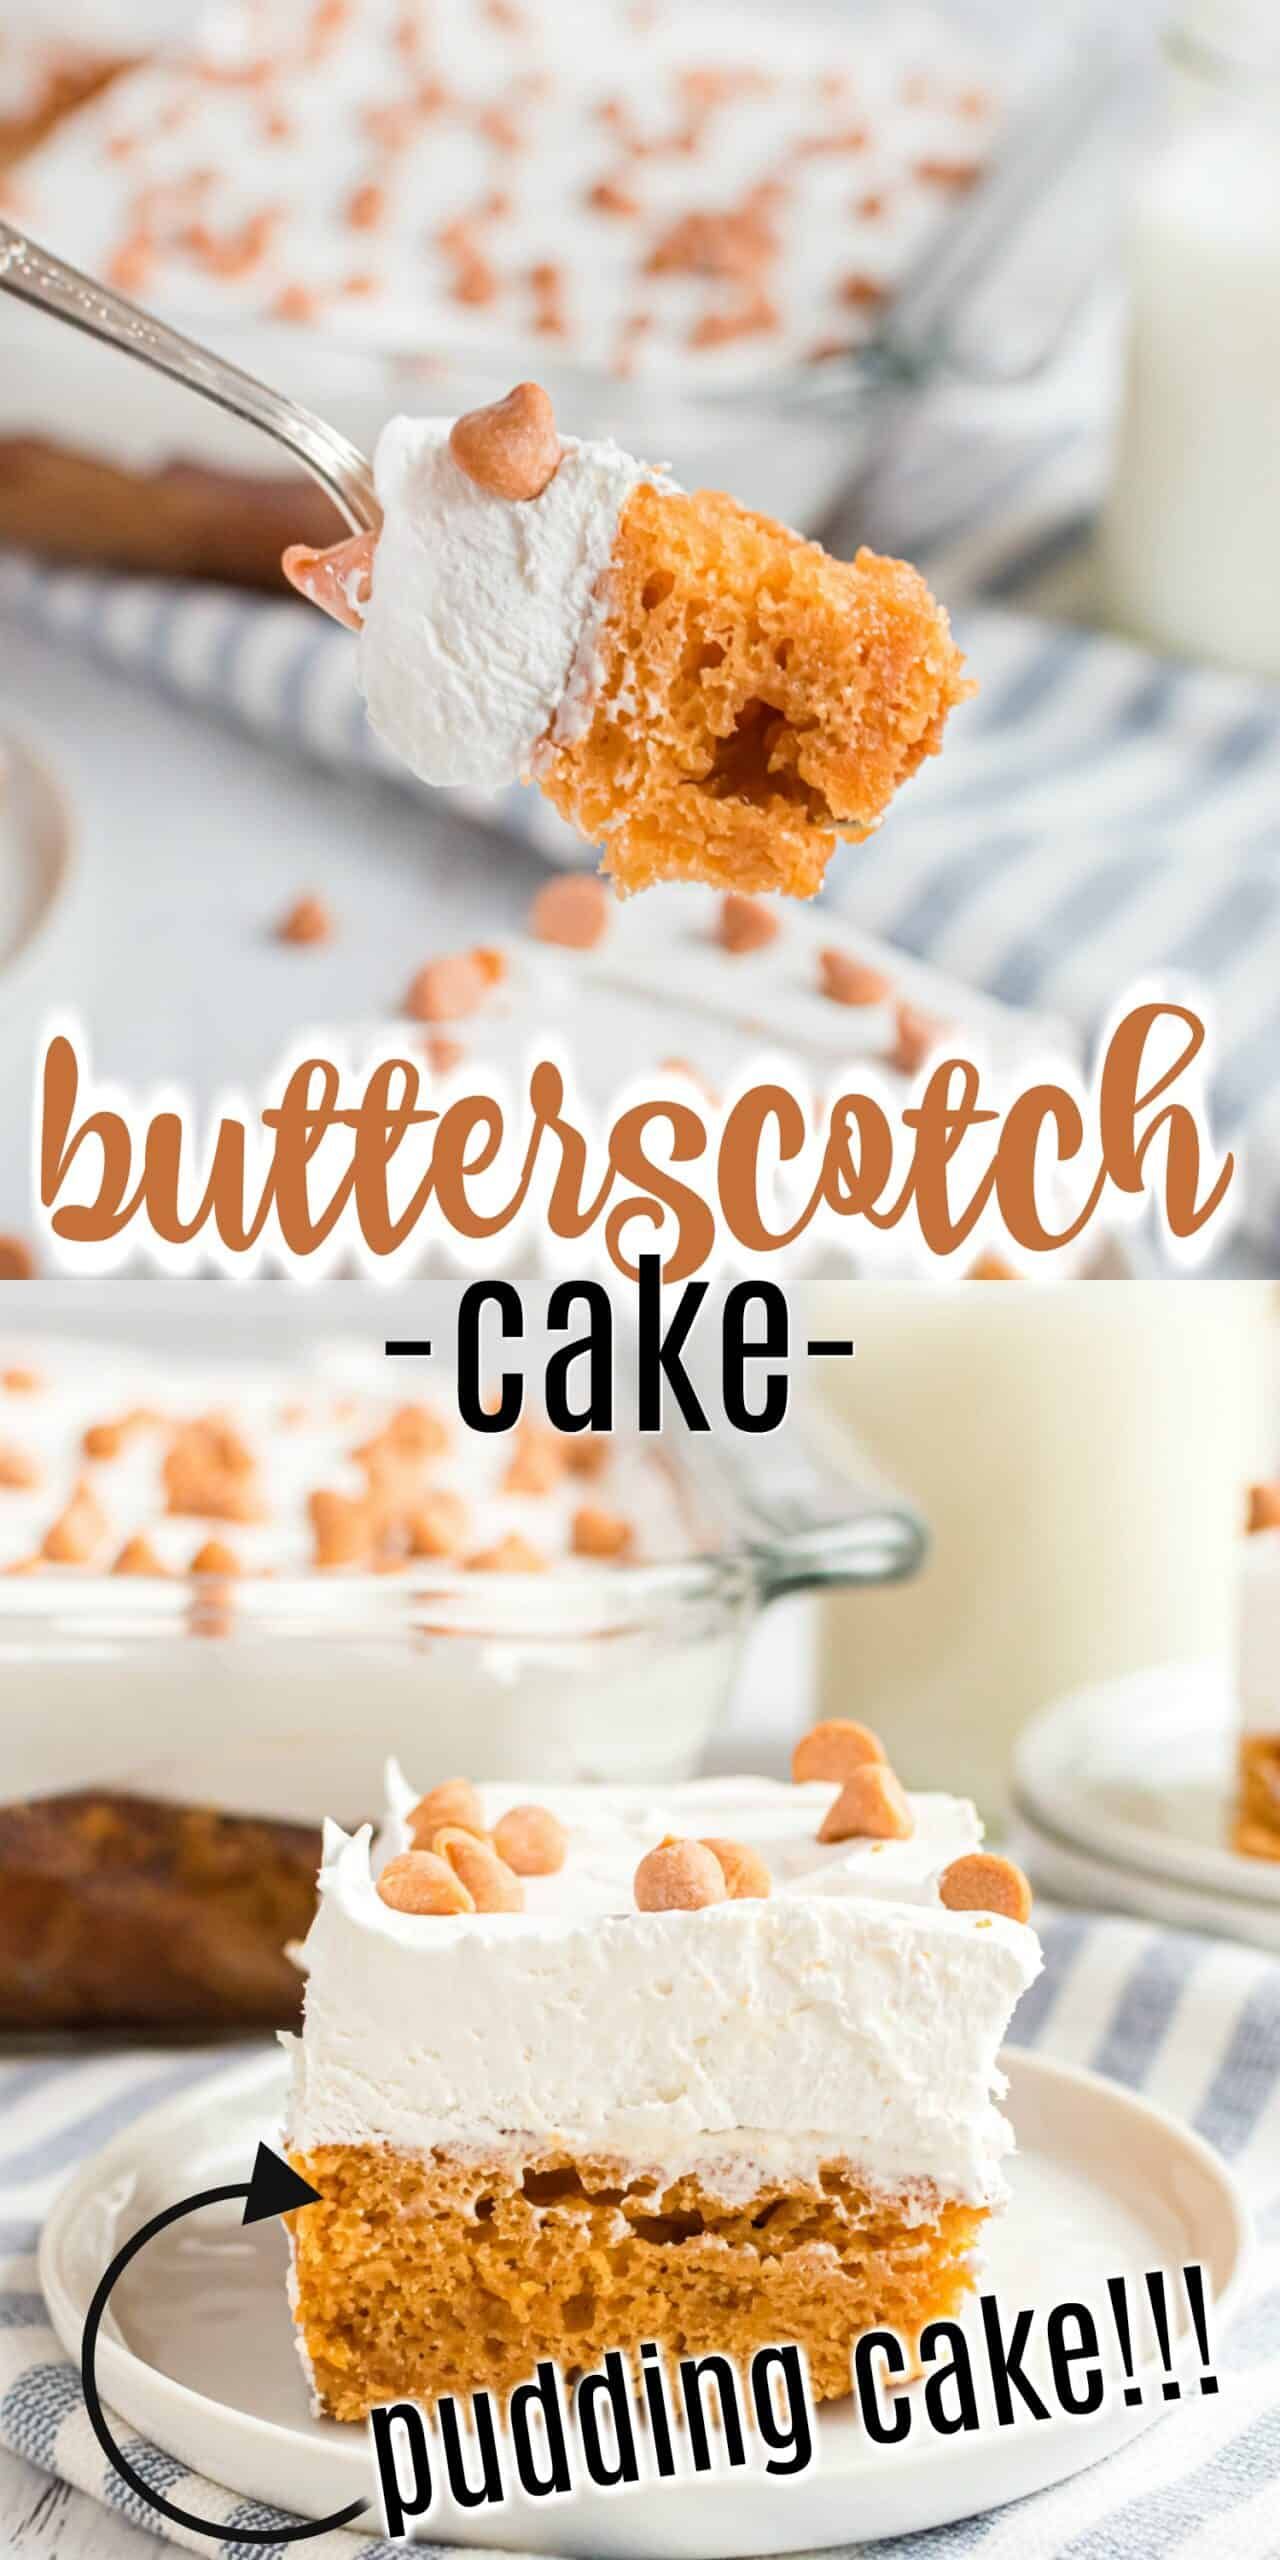 5 Ingredients and 5 minutes for Butterscotch Cake